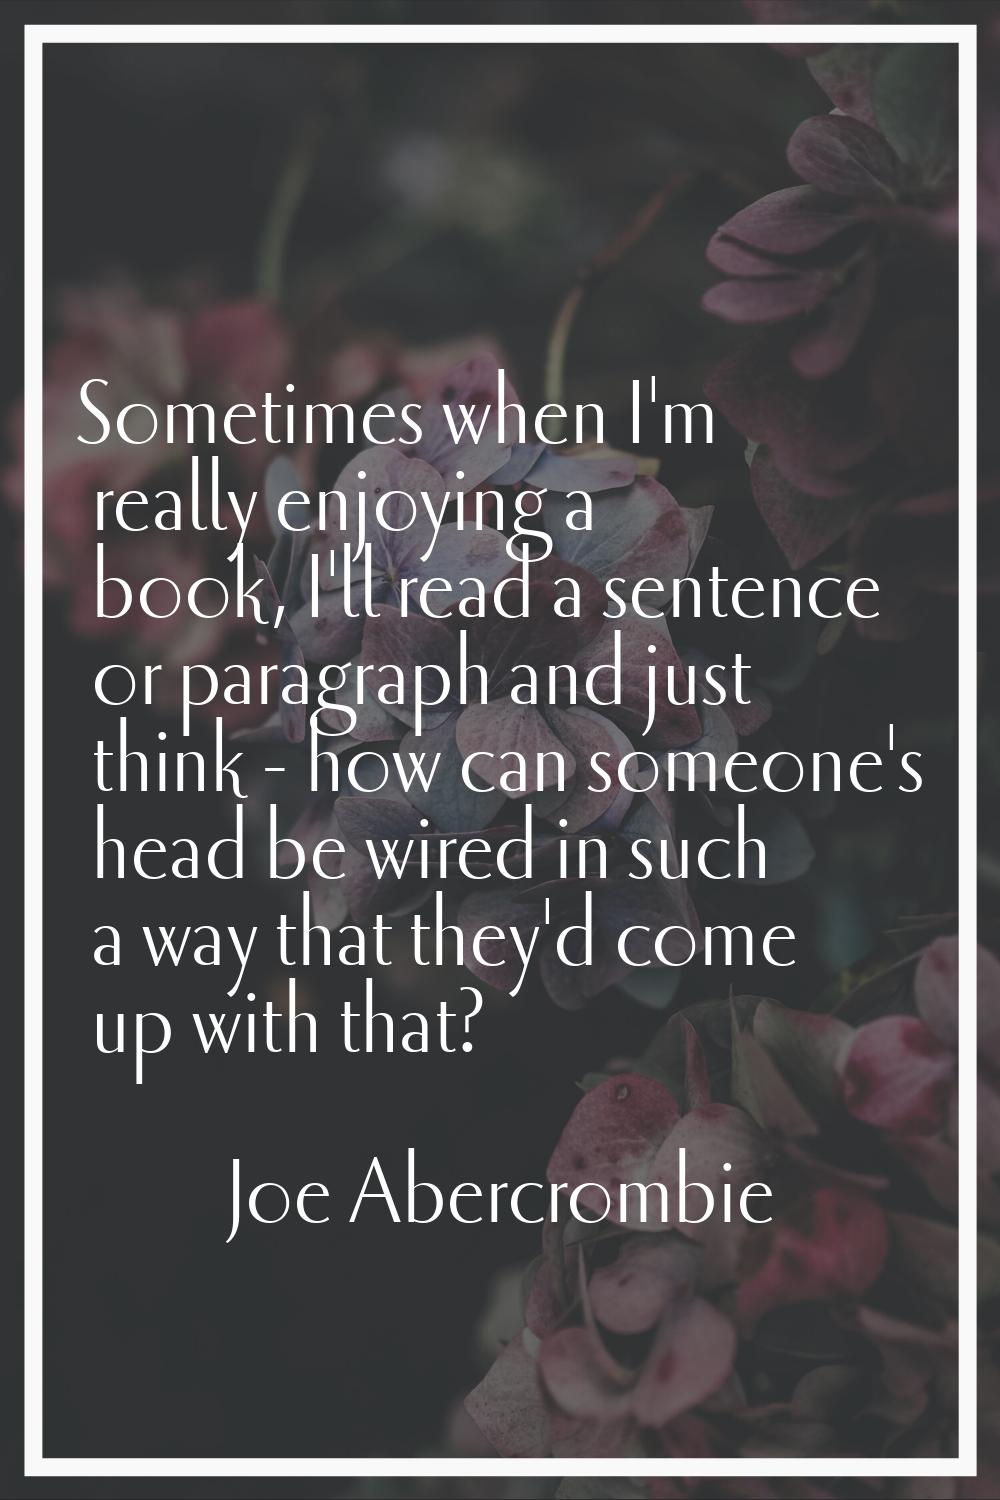 Sometimes when I'm really enjoying a book, I'll read a sentence or paragraph and just think - how c